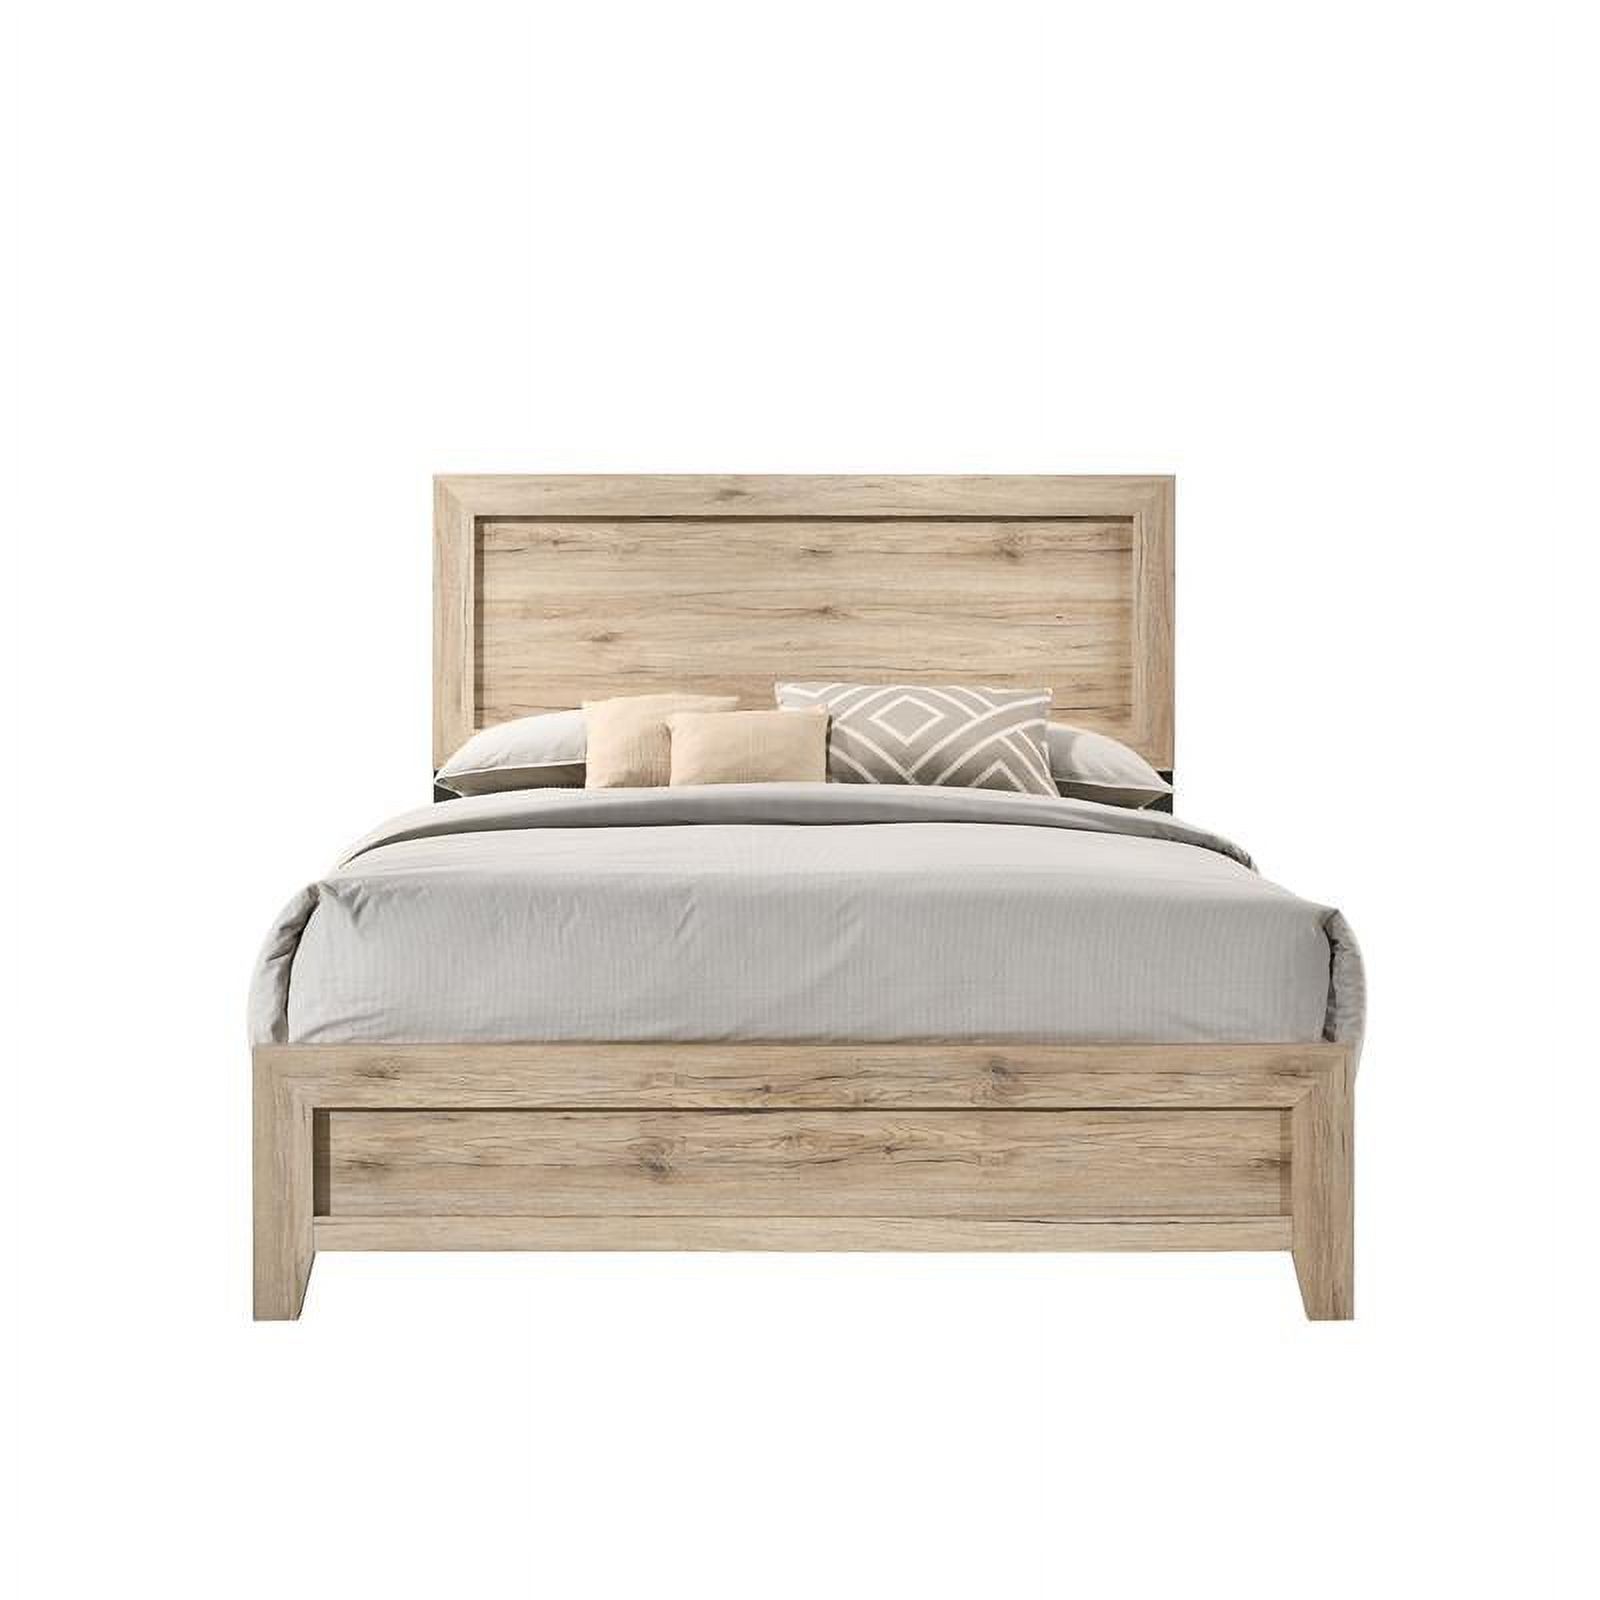 Miekor Furniture Miquell Eastern King Bed, Natural - image 1 of 2